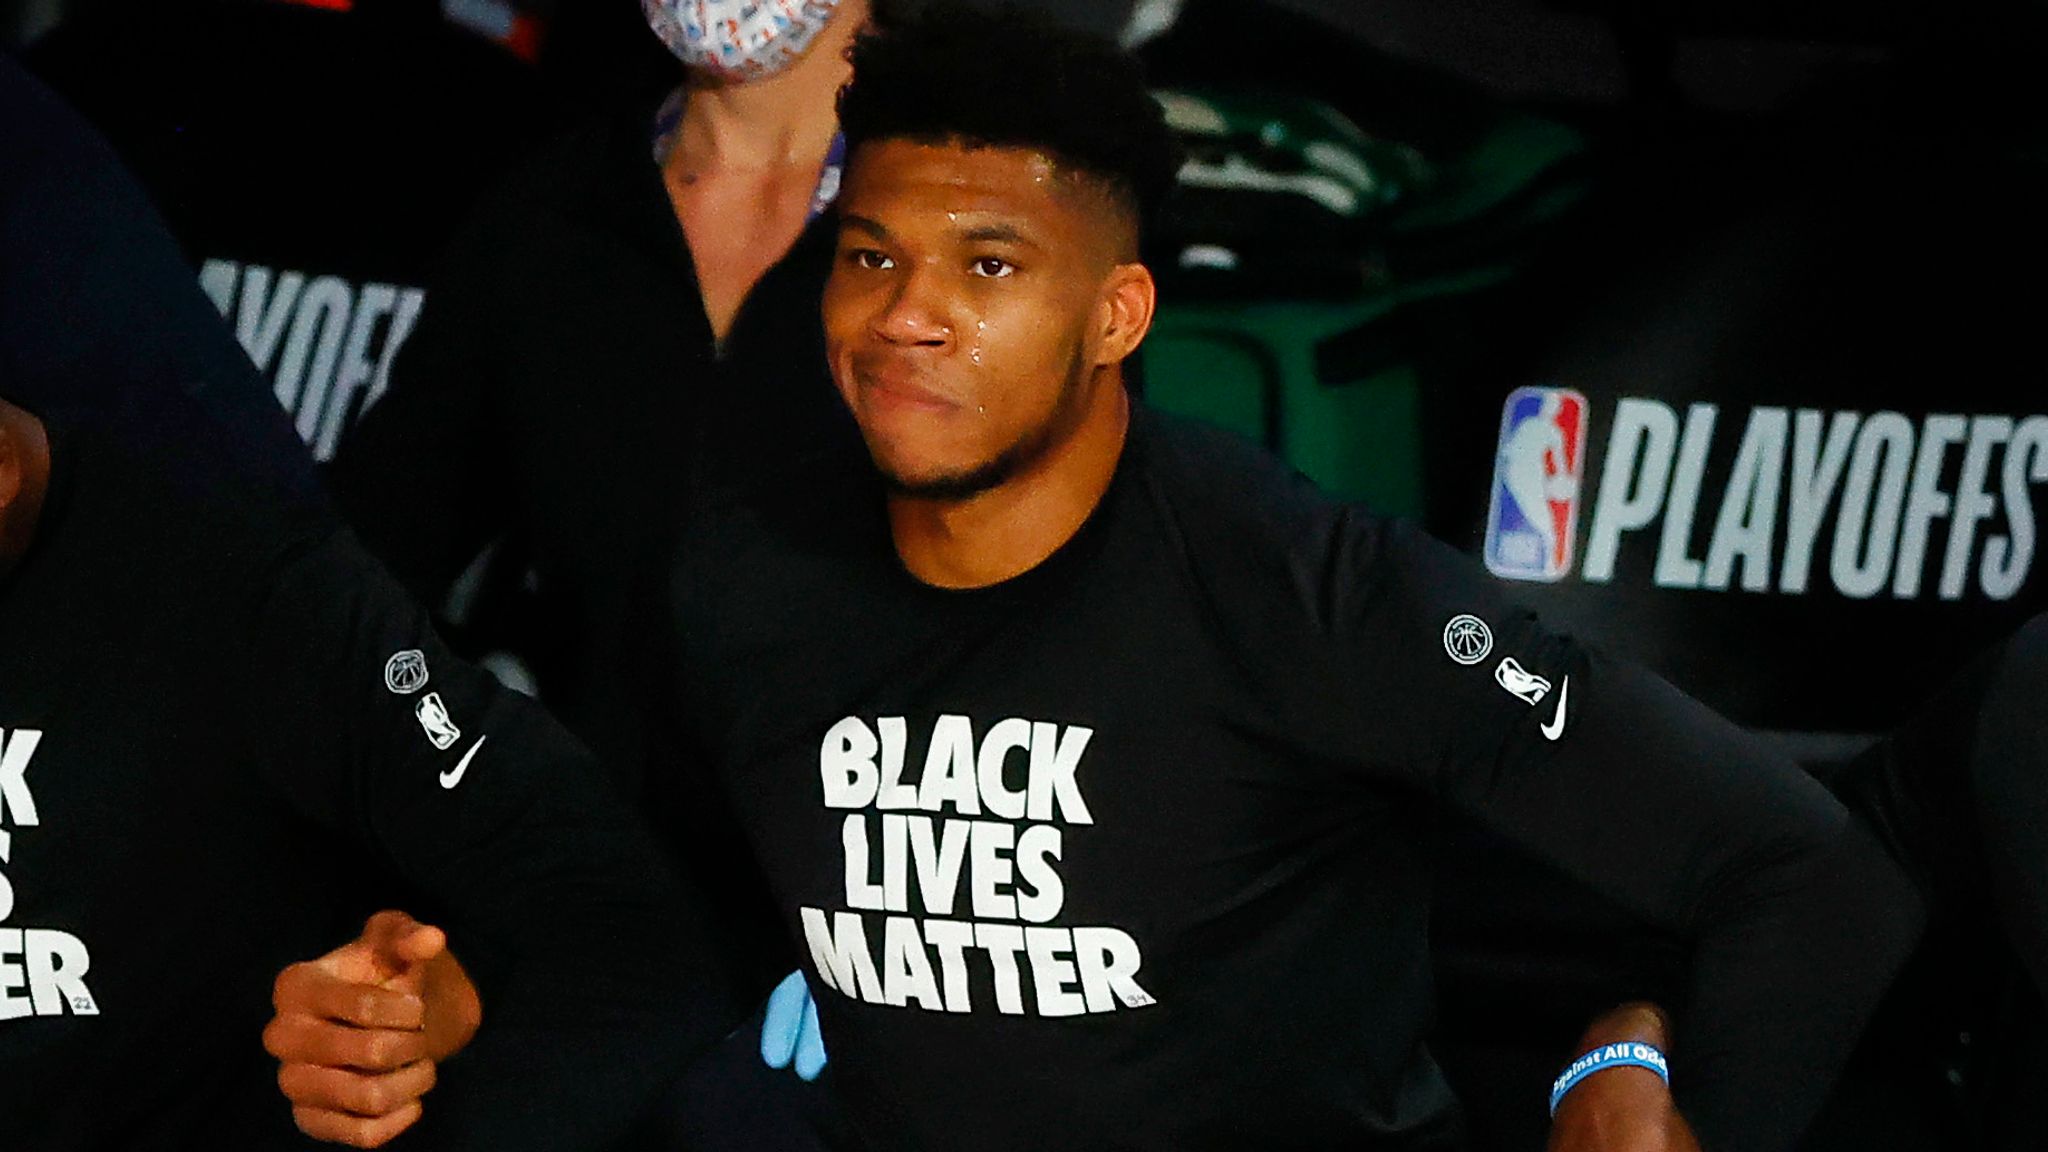 The annoying reason Giannis, Bucks are banned from wearing awesome